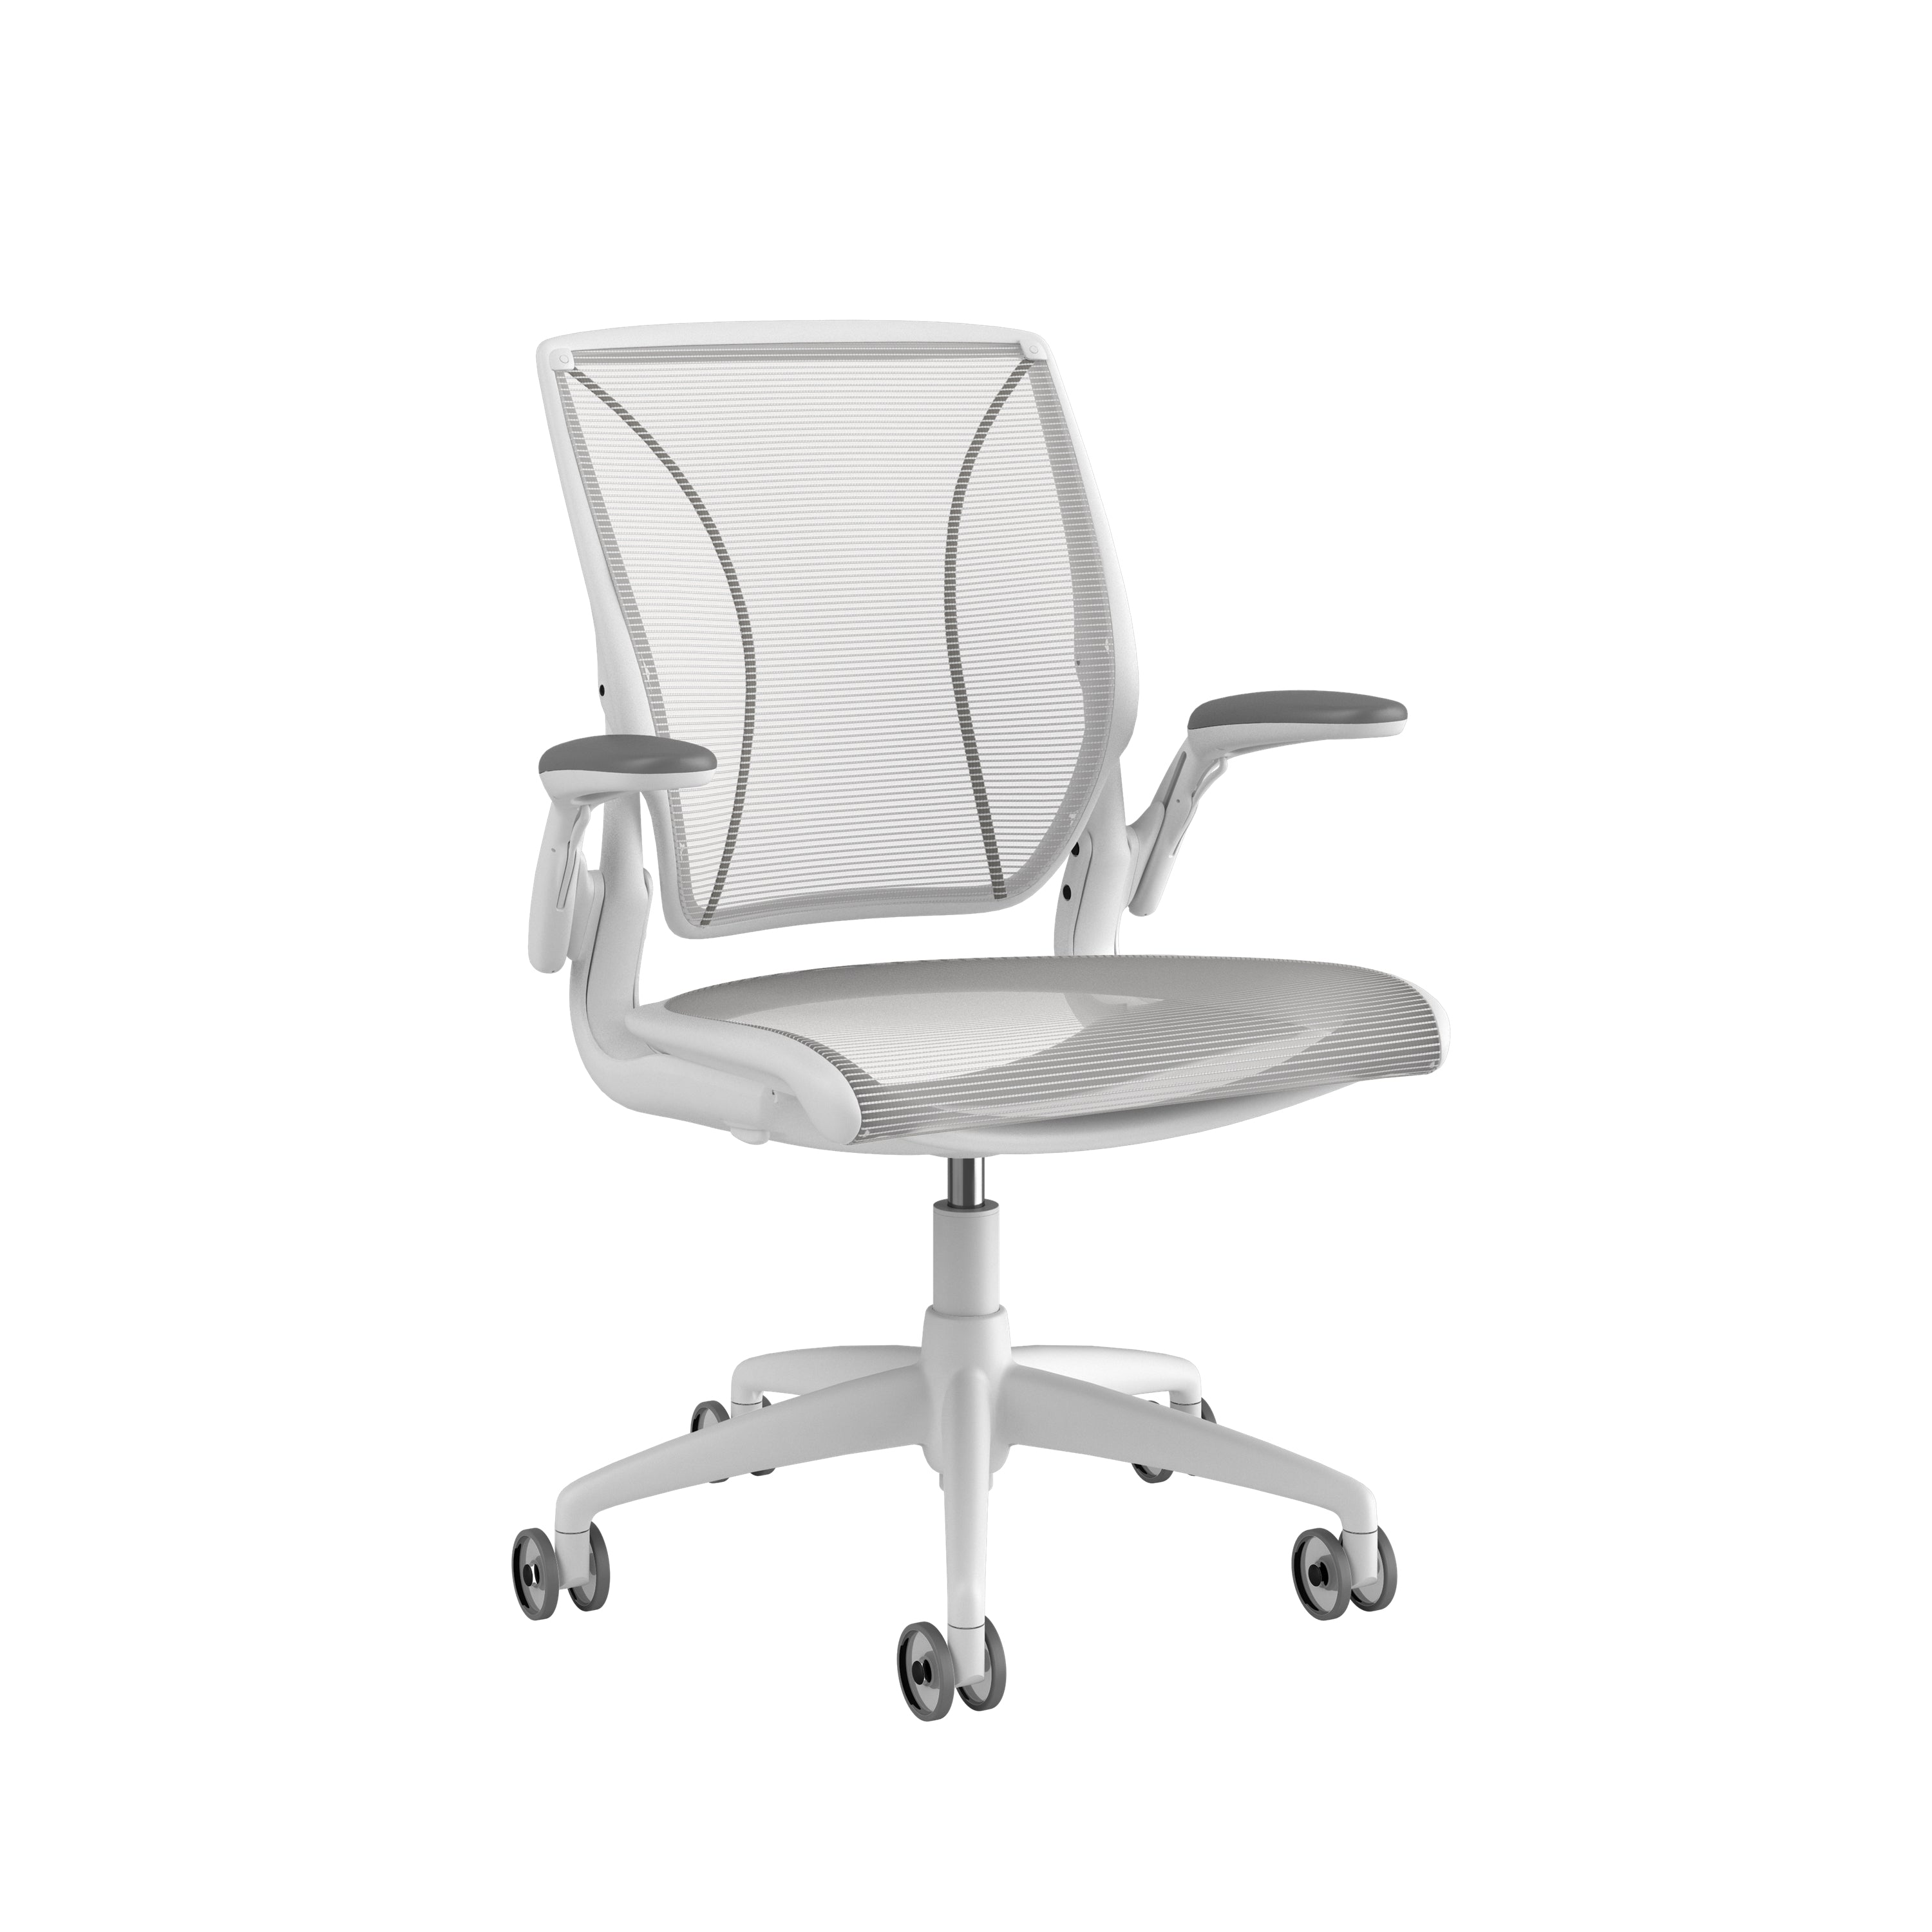 Humanscale World Chair White -Adj. Arms, soft casters, full mesh SPRING SALE!